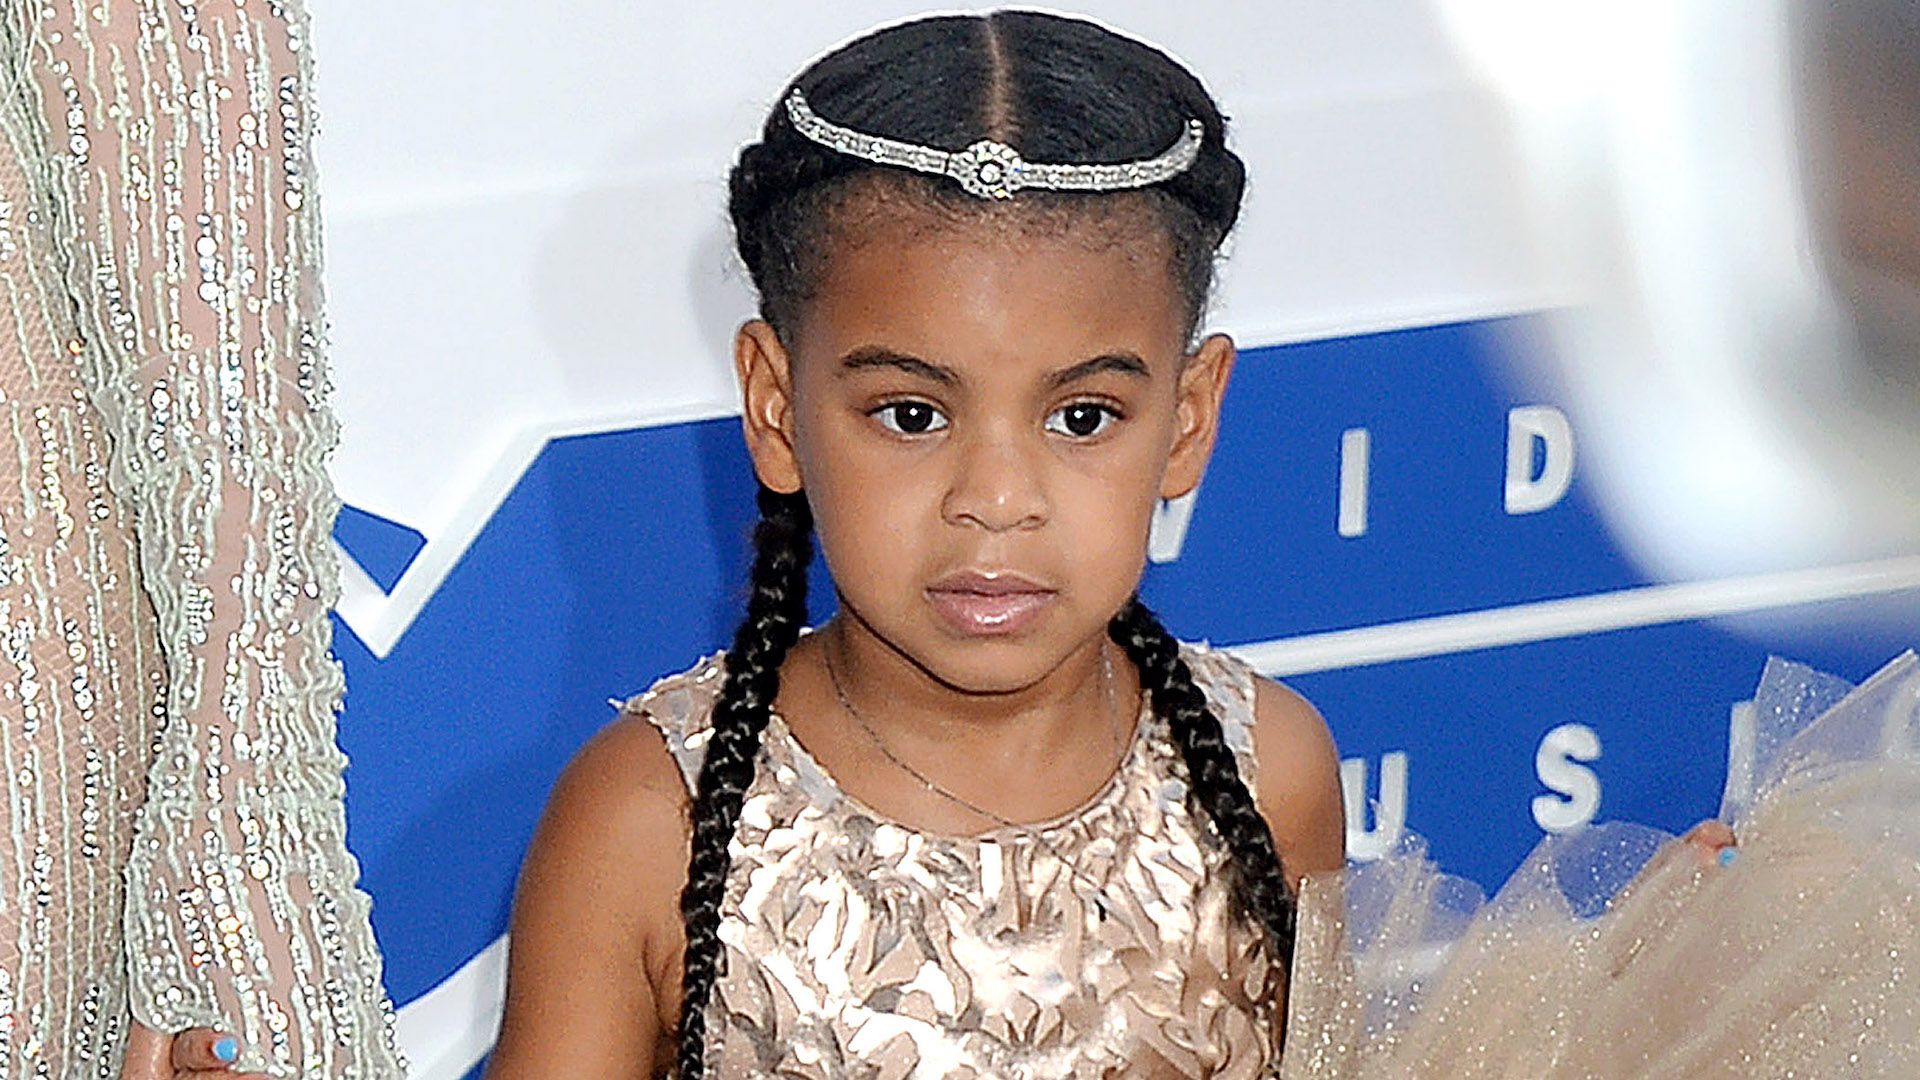 Blue Ivy Carter Steals the Show With a Joke in This Instagram